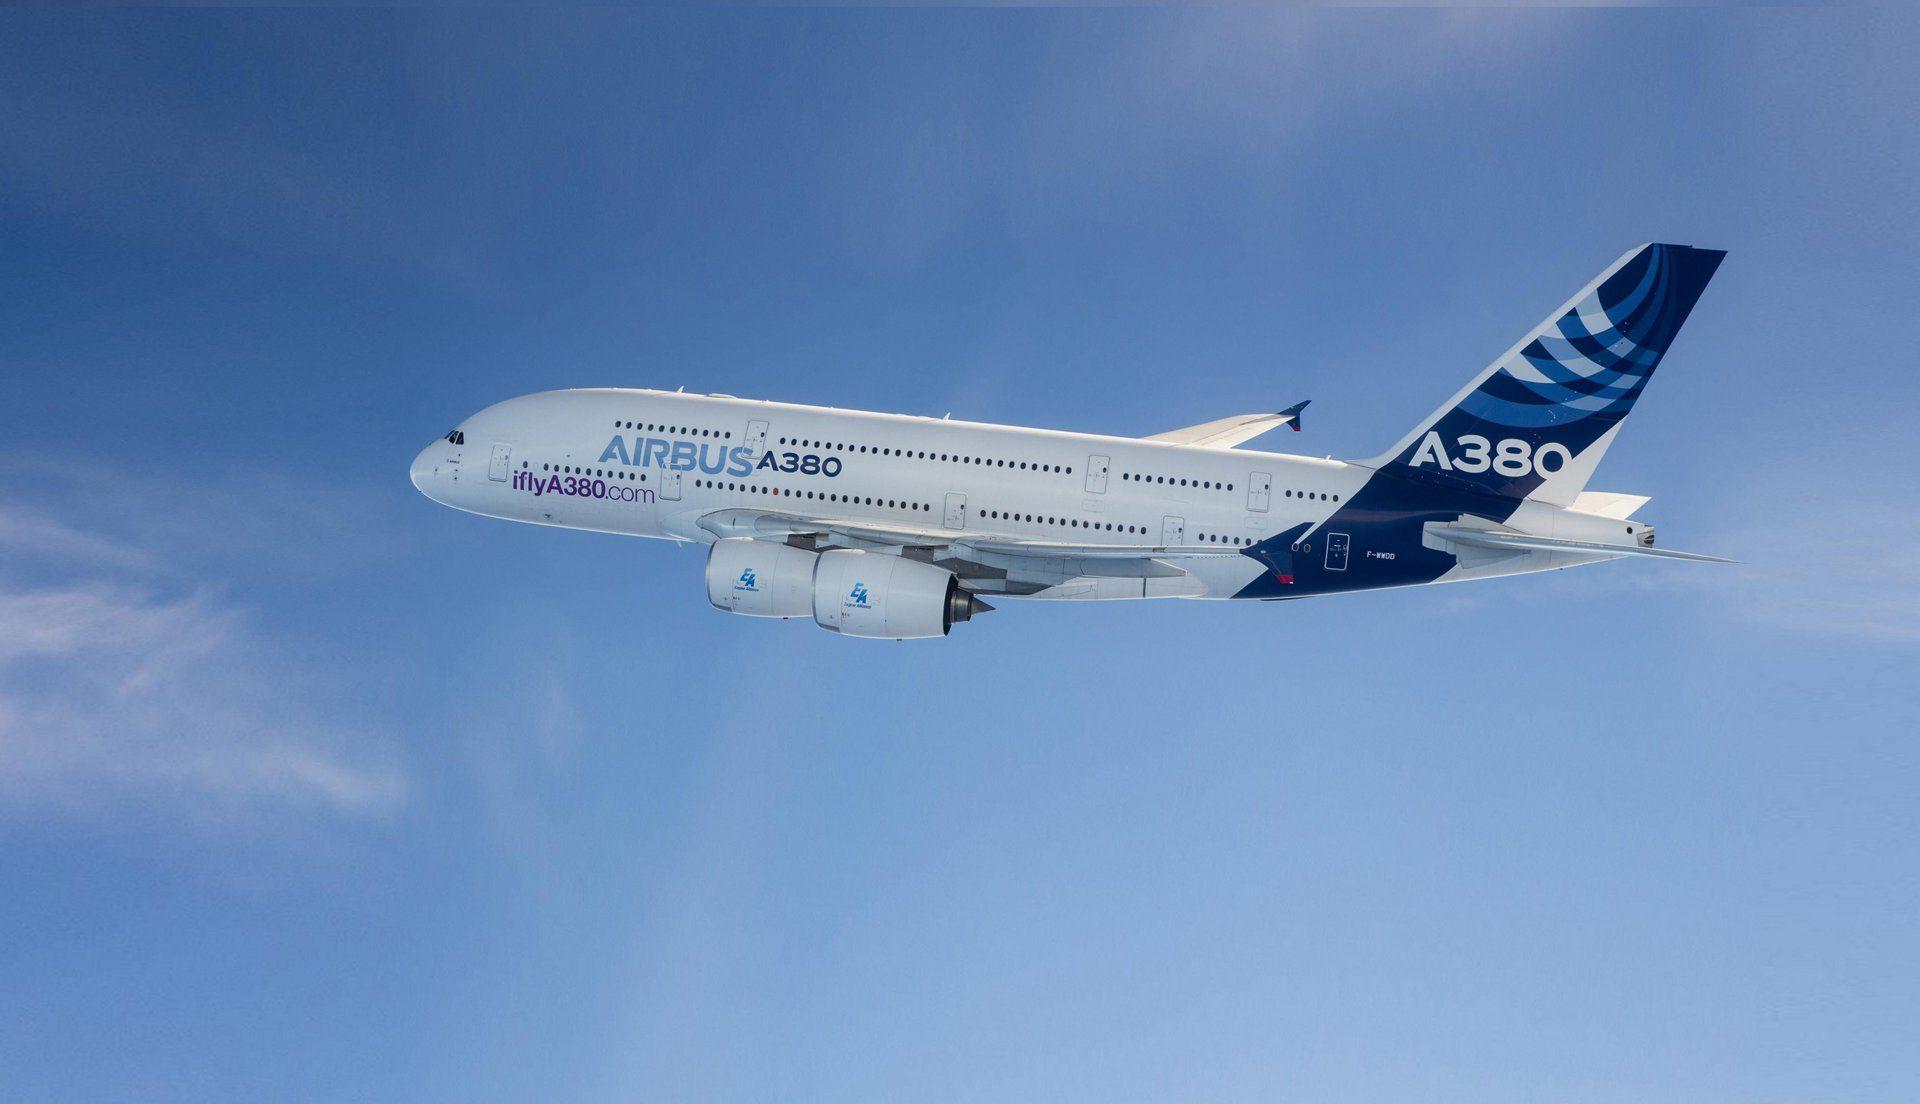 Airbus A380 Picture Full Size. Airbus A380 HD wallpaper